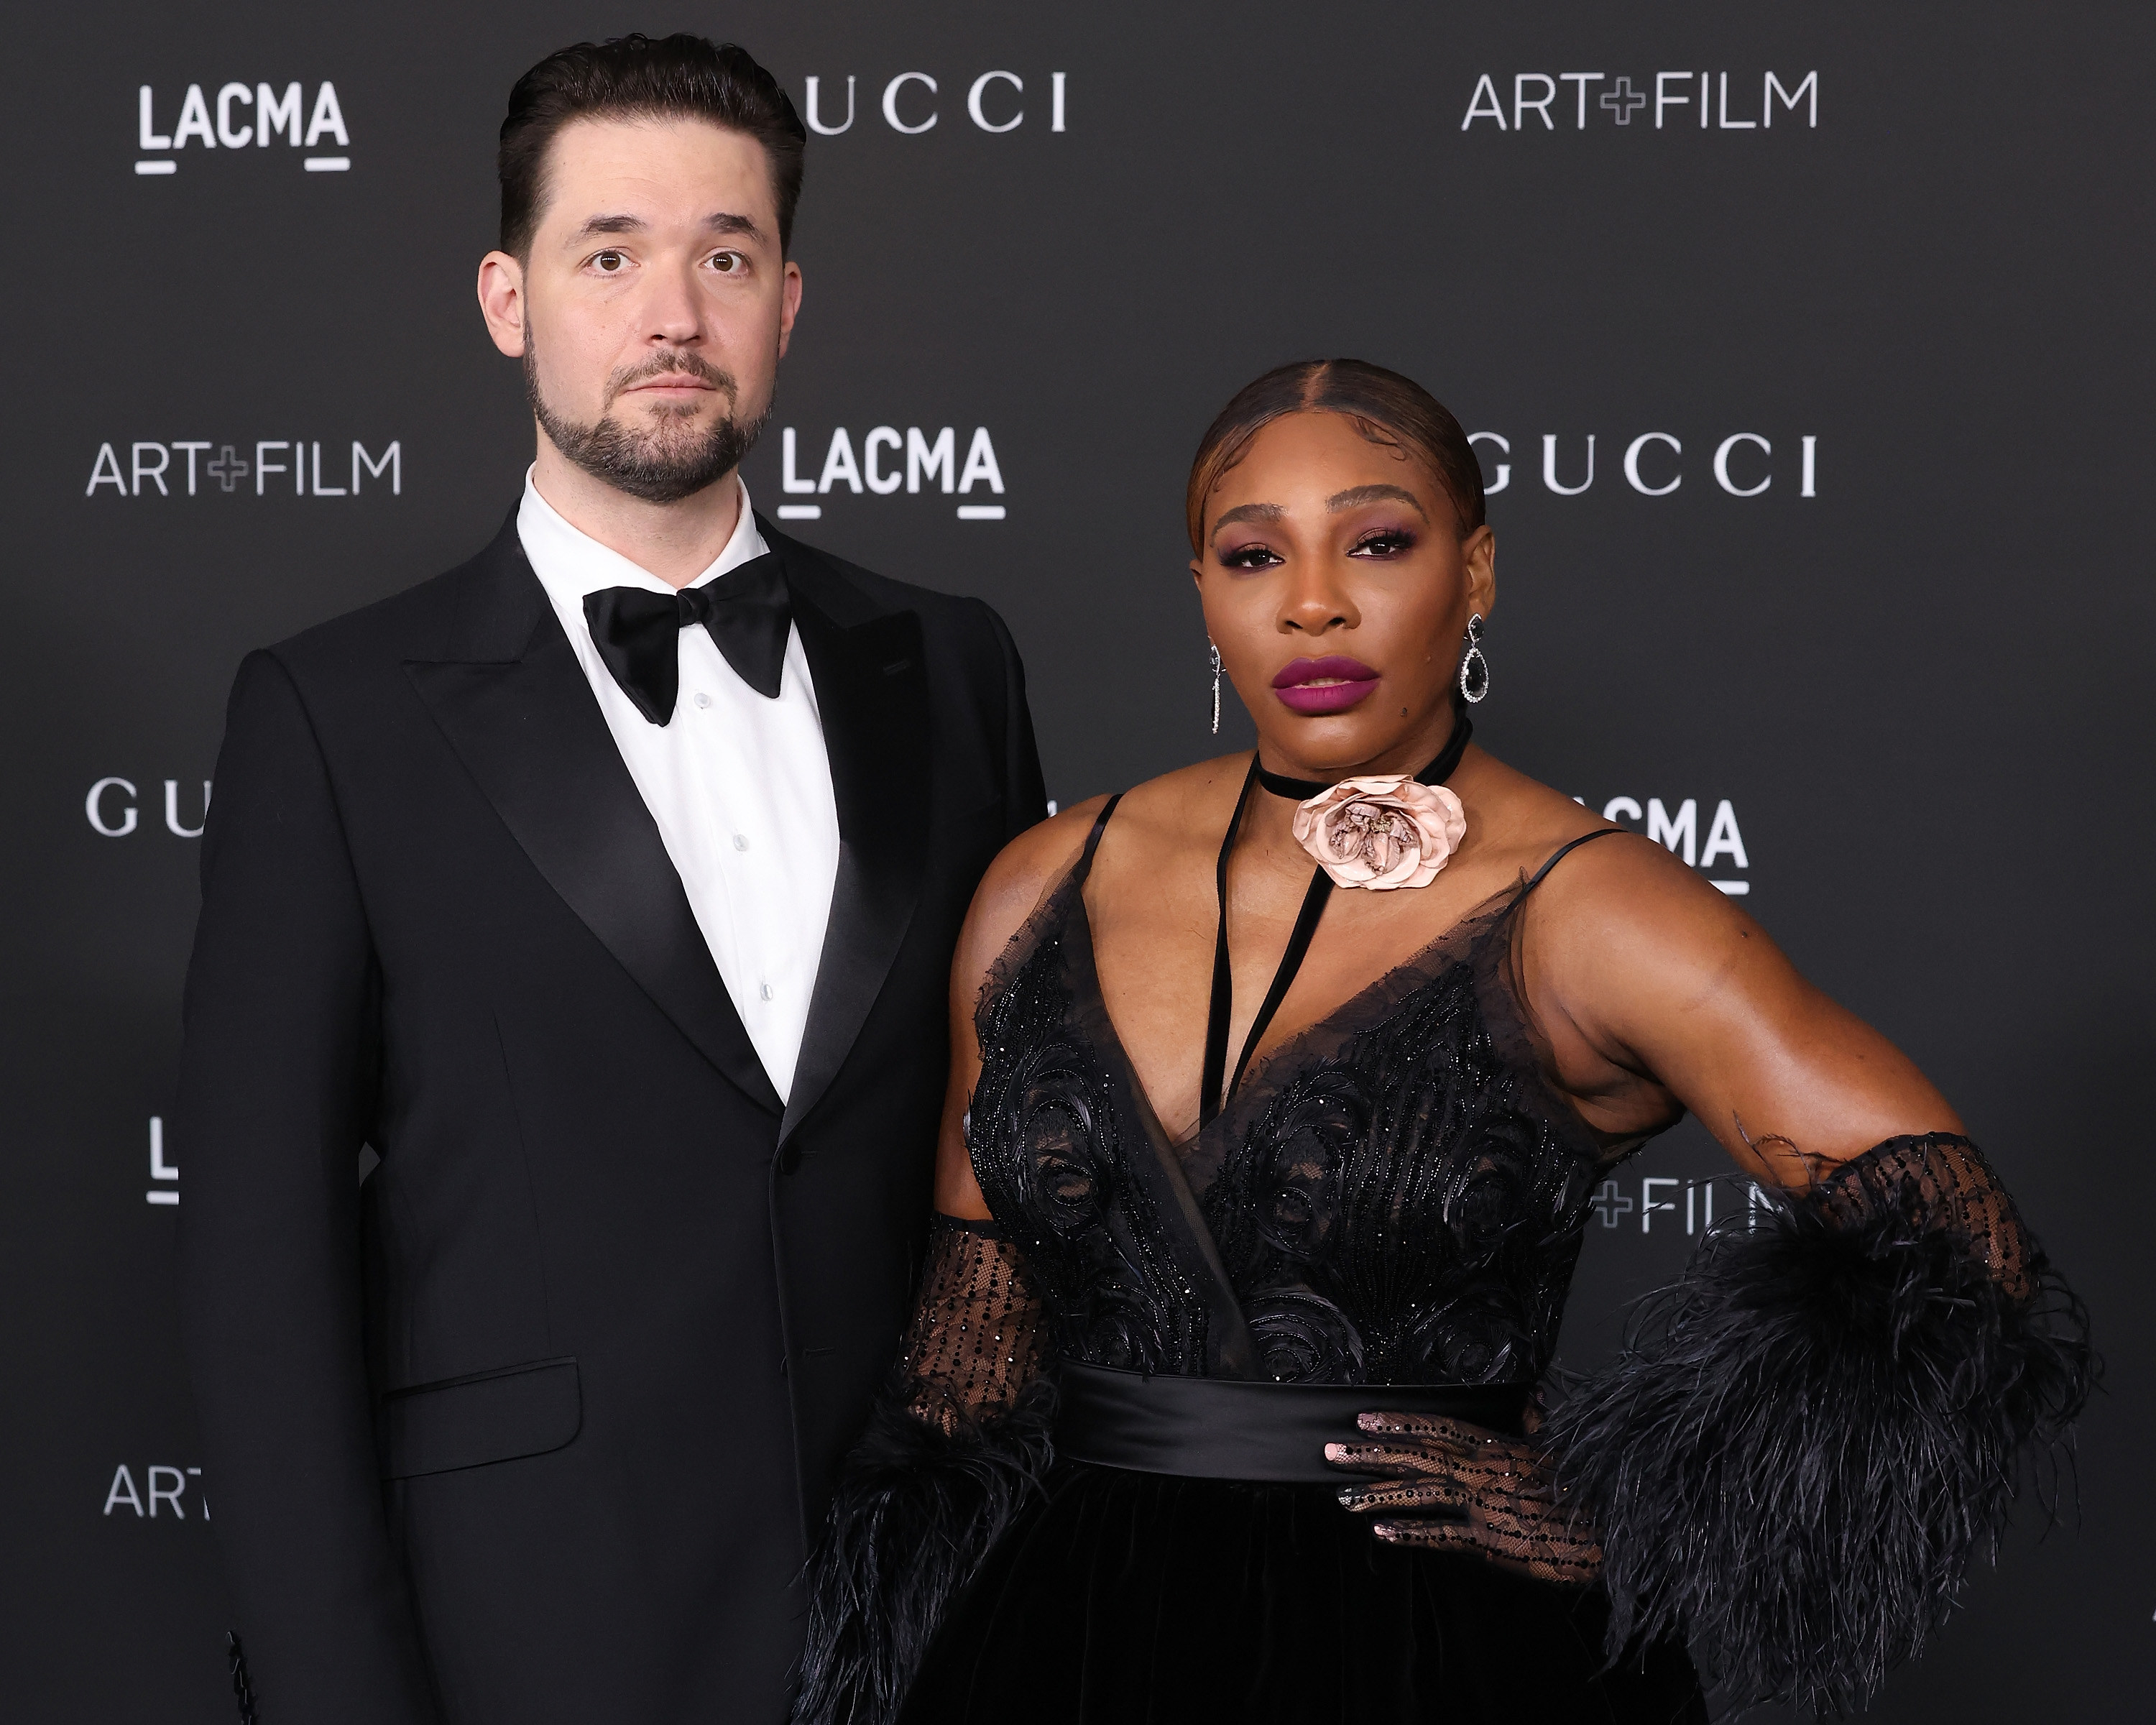 Alexis Ohanian and Serena Williams at the 2021 LACMA Art + Film Gala presented by Gucci on November 06, 2021